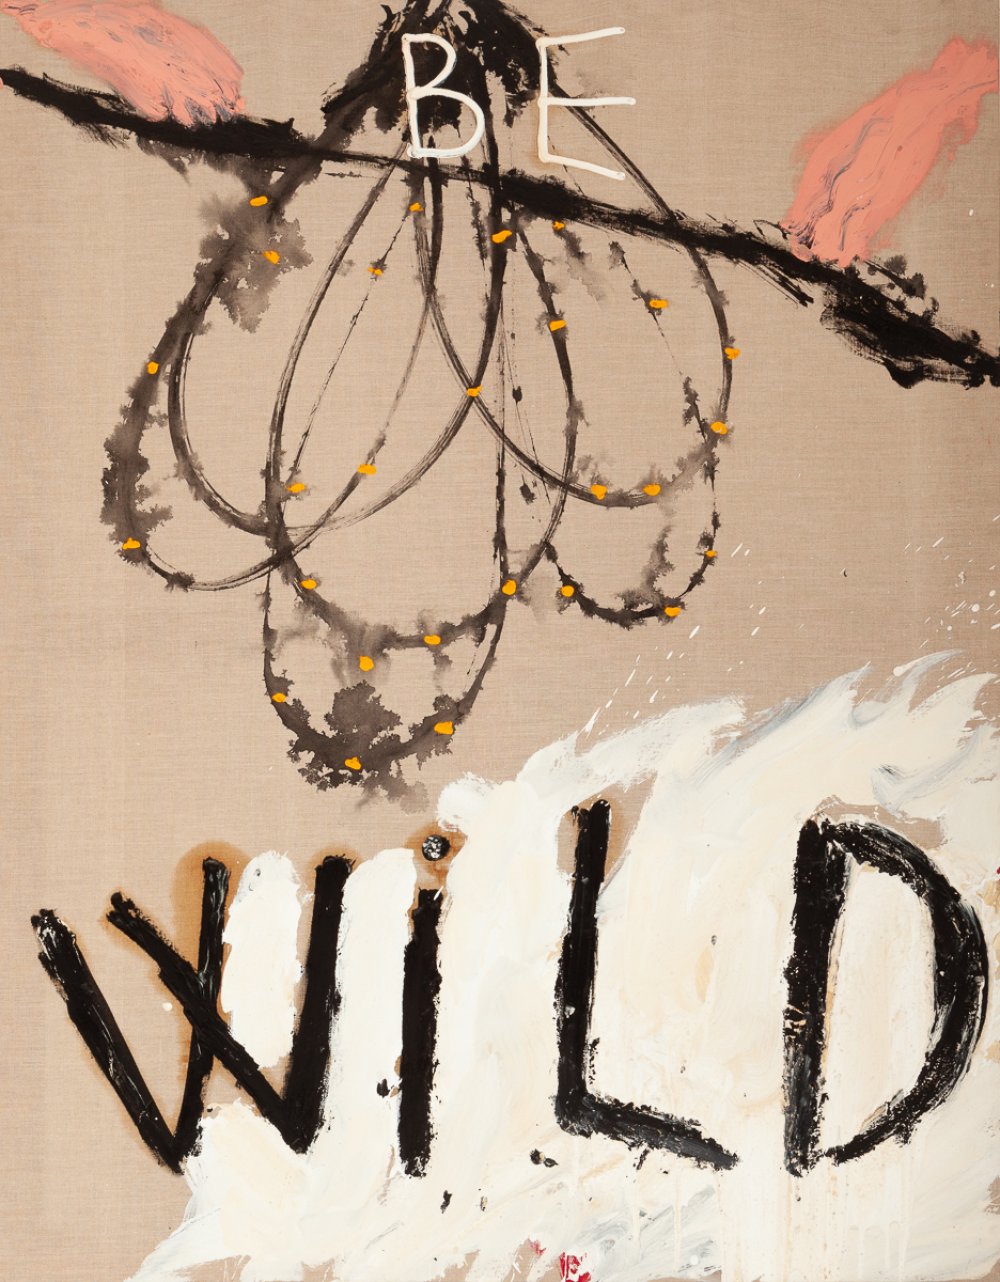 PACO CELORRIO (Burgos, 1956)."Wild", 2000.Oil on canvas.Signed and dated on the back.Size: 146 x 114